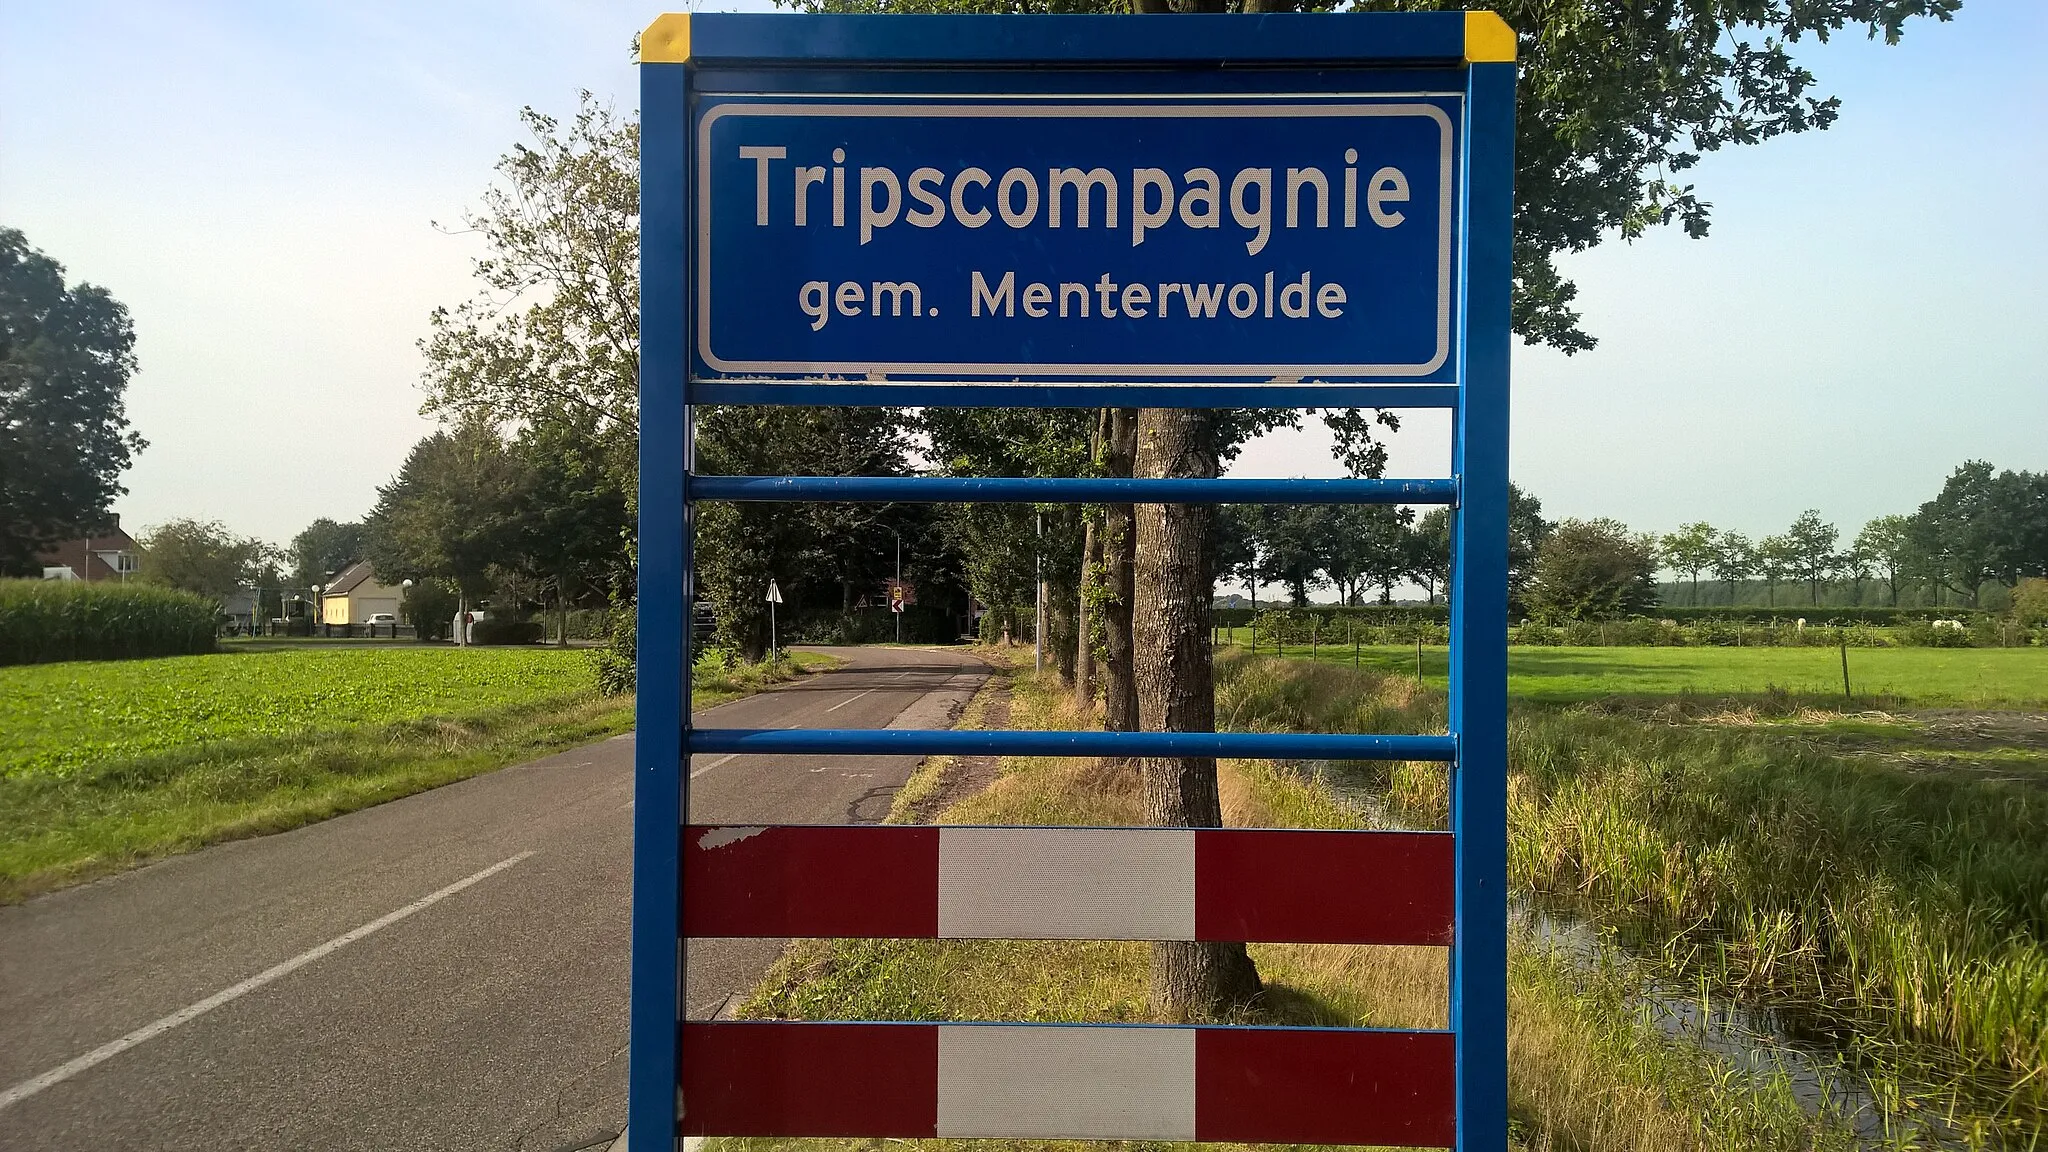 Photo showing: A sign for Tripscompangie (Trip's Company), a village in Menterwolde.